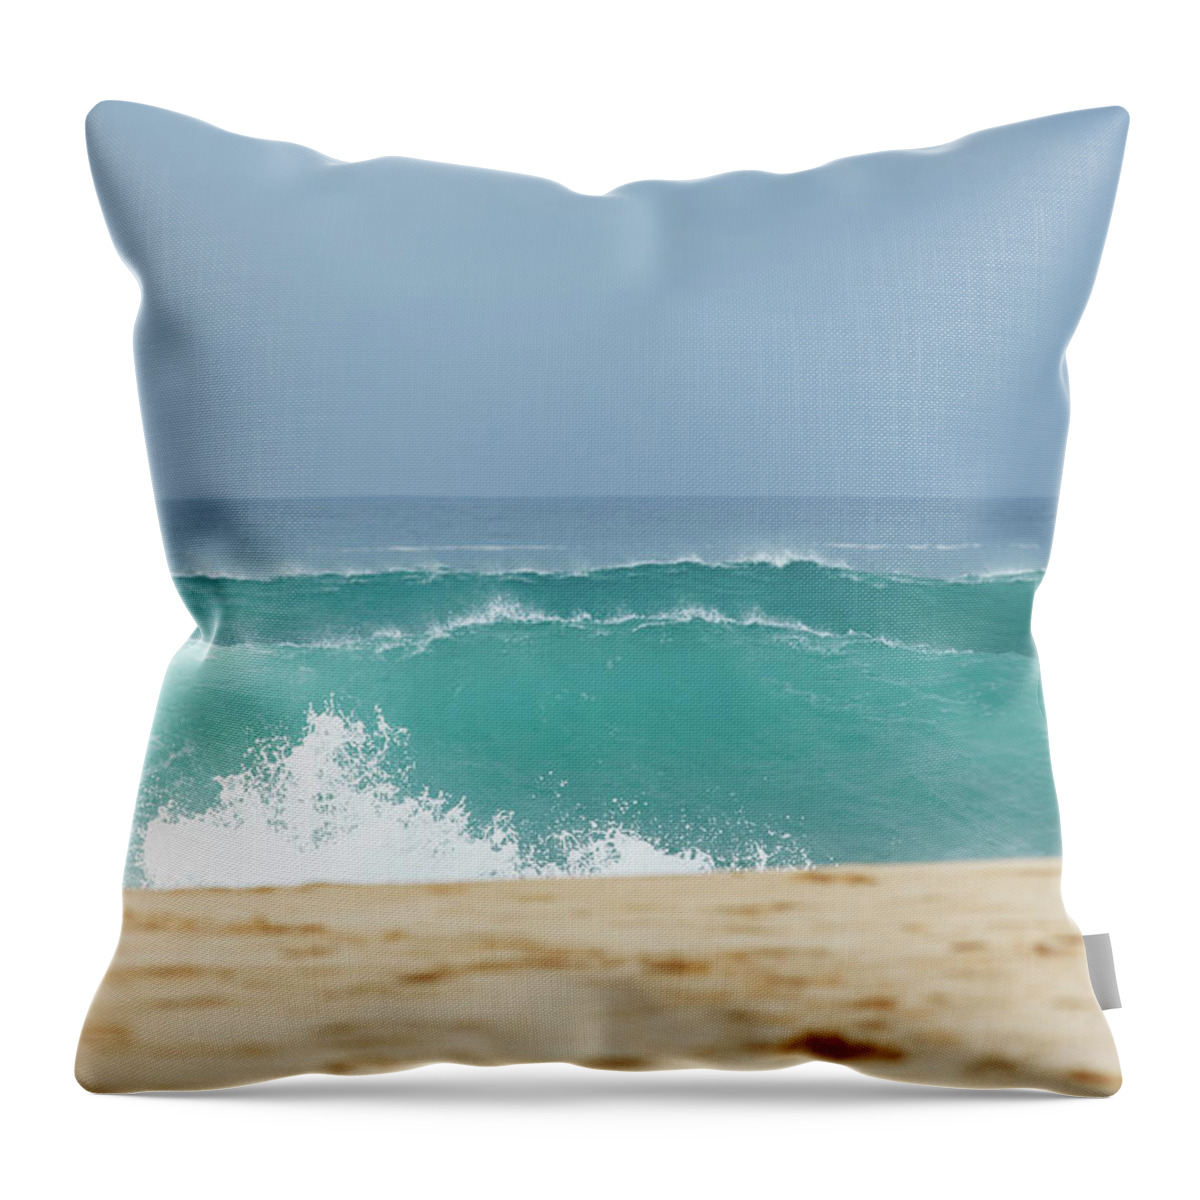 Scenics Throw Pillow featuring the photograph Wave Action by Laszlo Podor